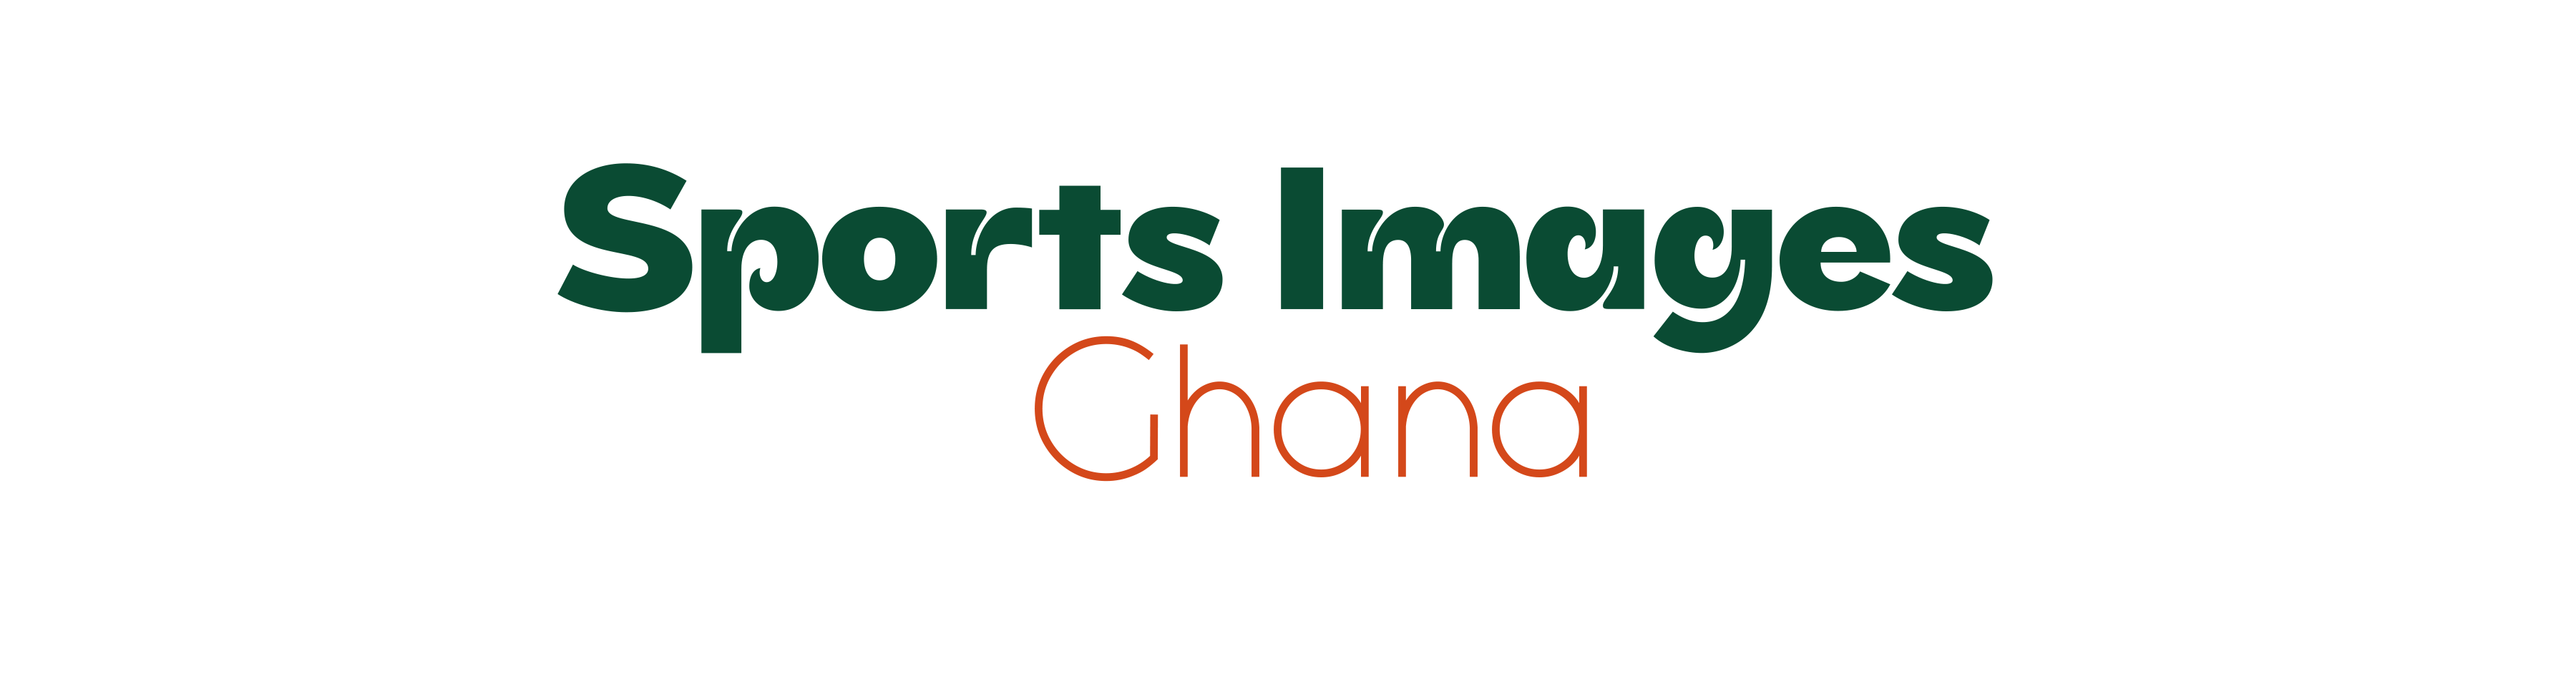 Sports Images Ghana